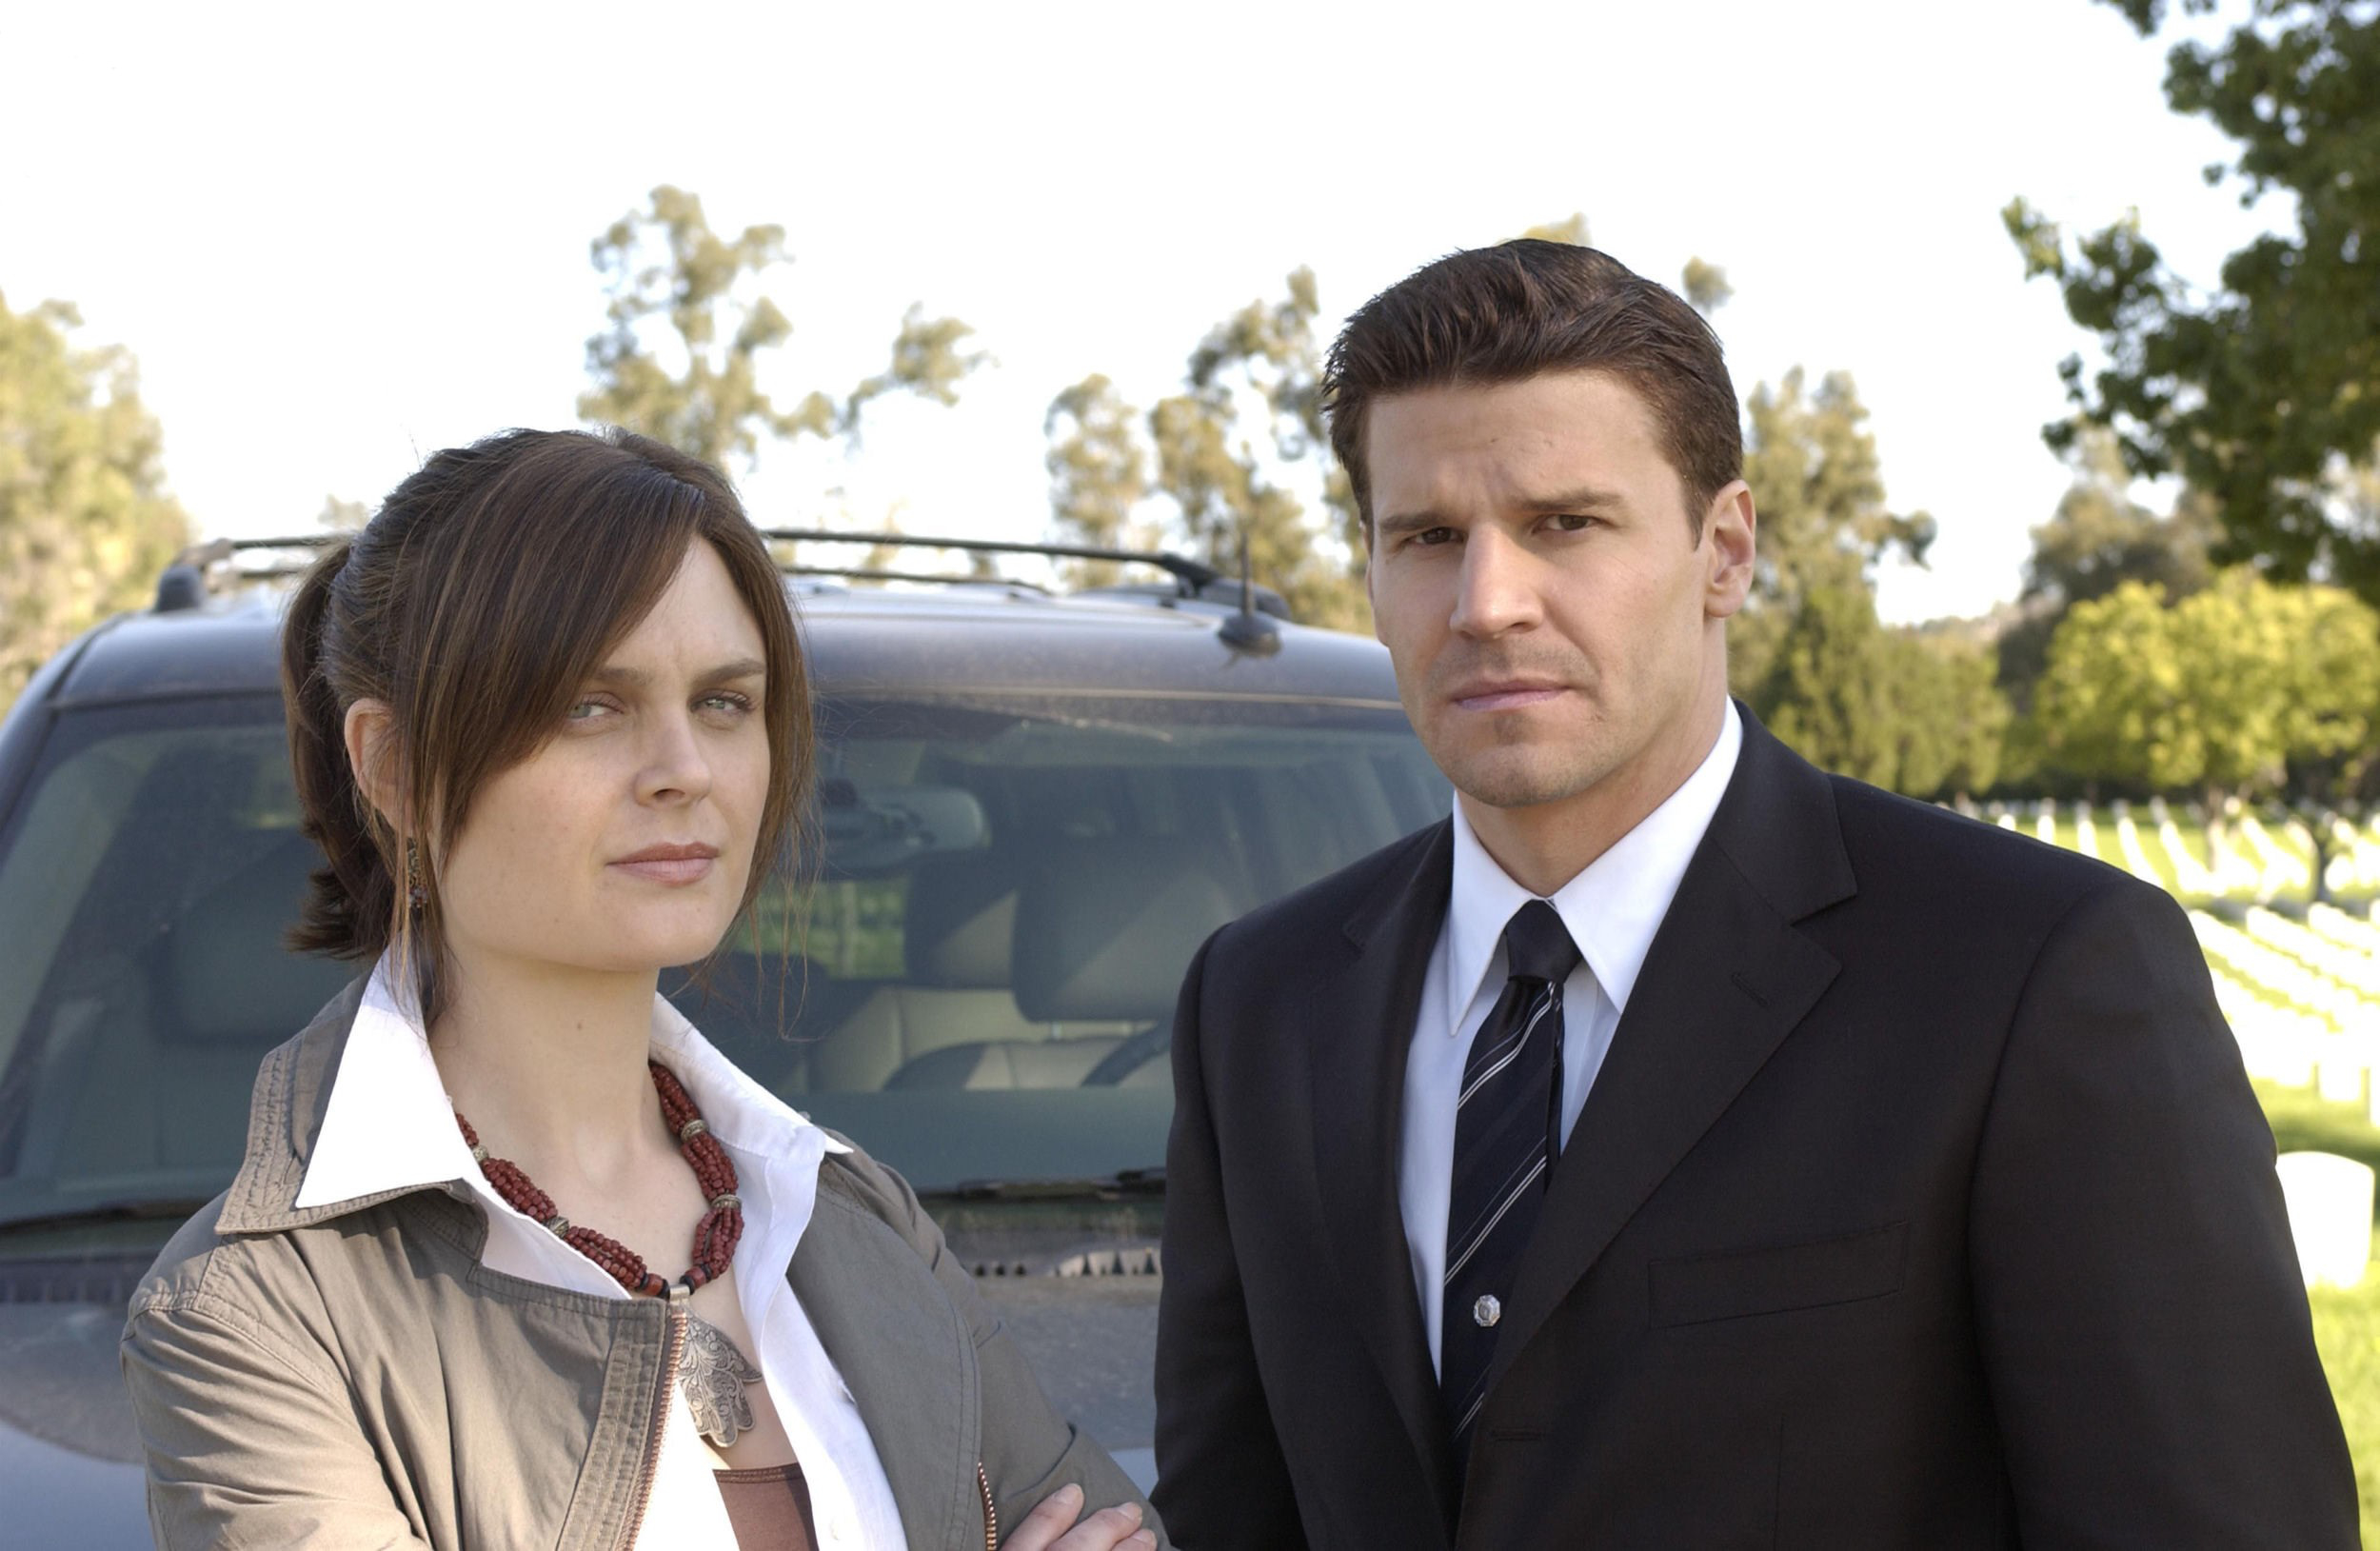 KumkumArts TV Show Bones Camille Saroyan Taylor Seeley Booth David Boreanaz  Poster 12 x 18 Inch, HD Quality Gloss Paper Qty 1. Paper Print - TV Series  posters in India - Buy art, film, design, movie, music, nature and  educational paintings/wallpapers